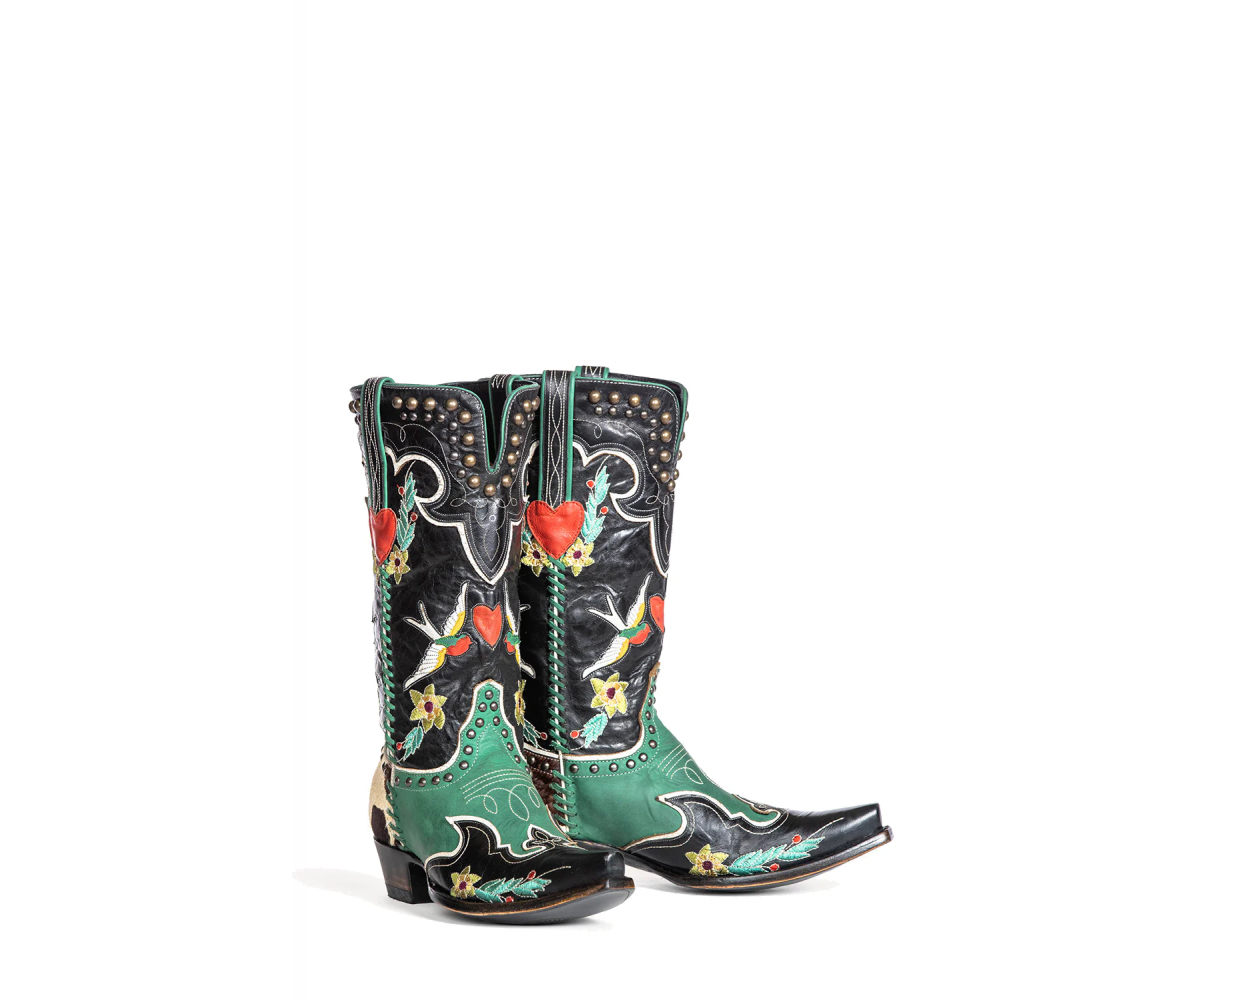 Midnight Cowboy - Old Gringo Boots at Bourbon Cowgirl